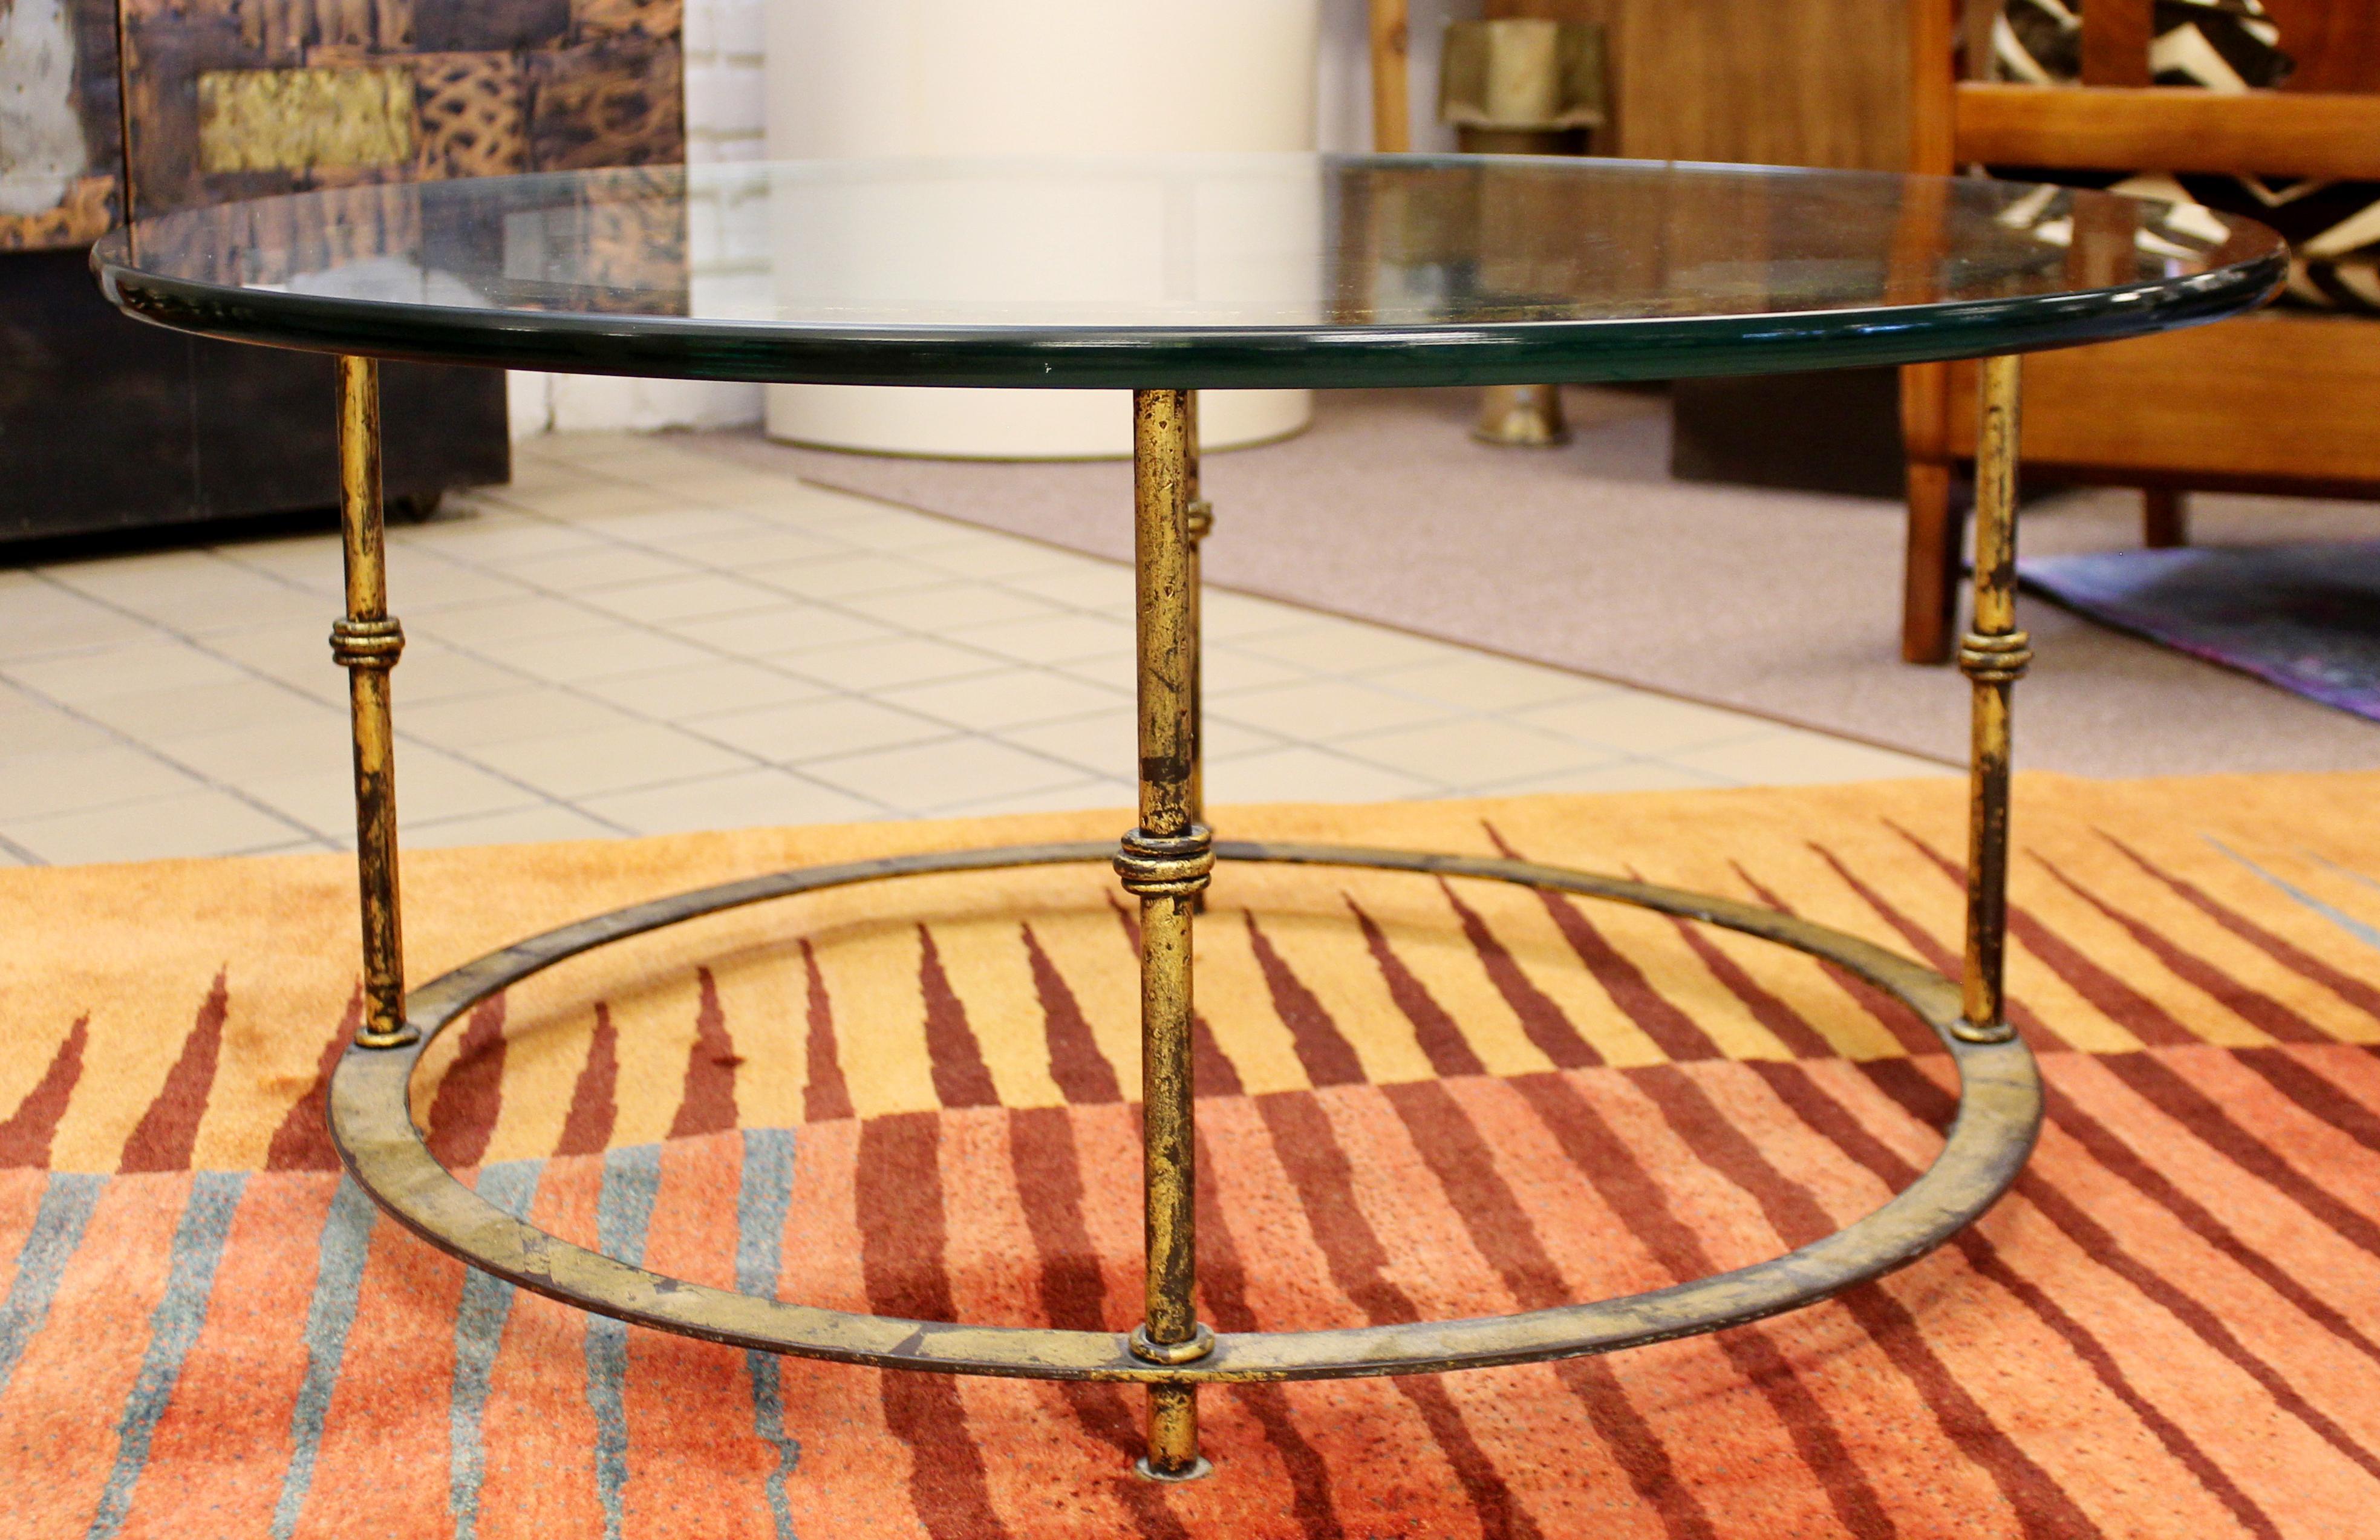 For your consideration is a beautiful, round coffee table, with a glass top on a patinated brass base, circa the 1960s. In excellent vintage condition. The dimensions are 36